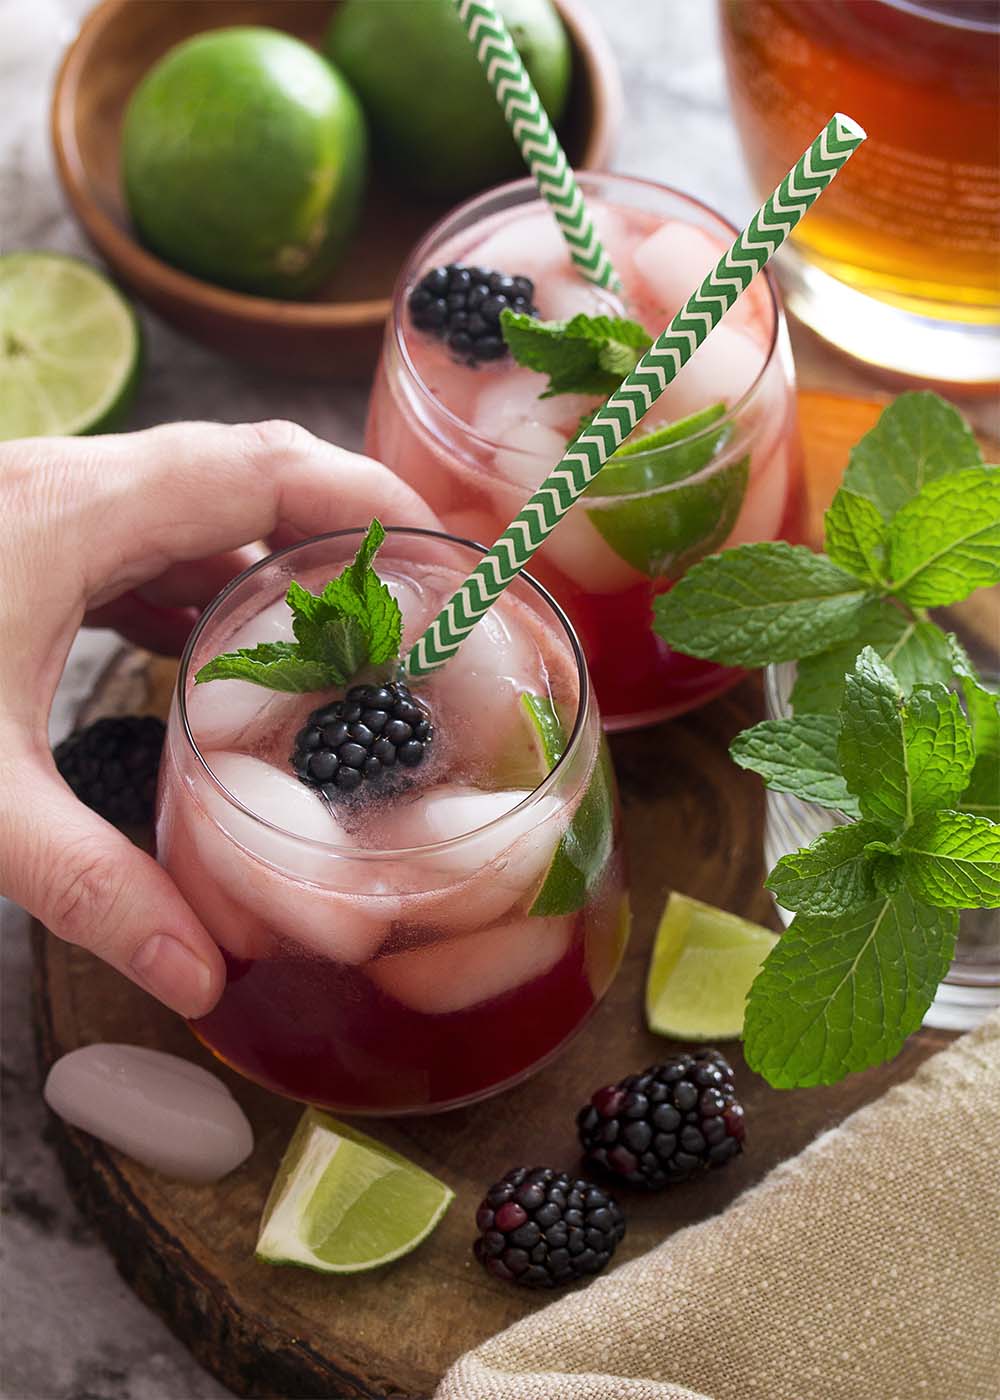 Top view of a hand reaching for a blackberry mojito.